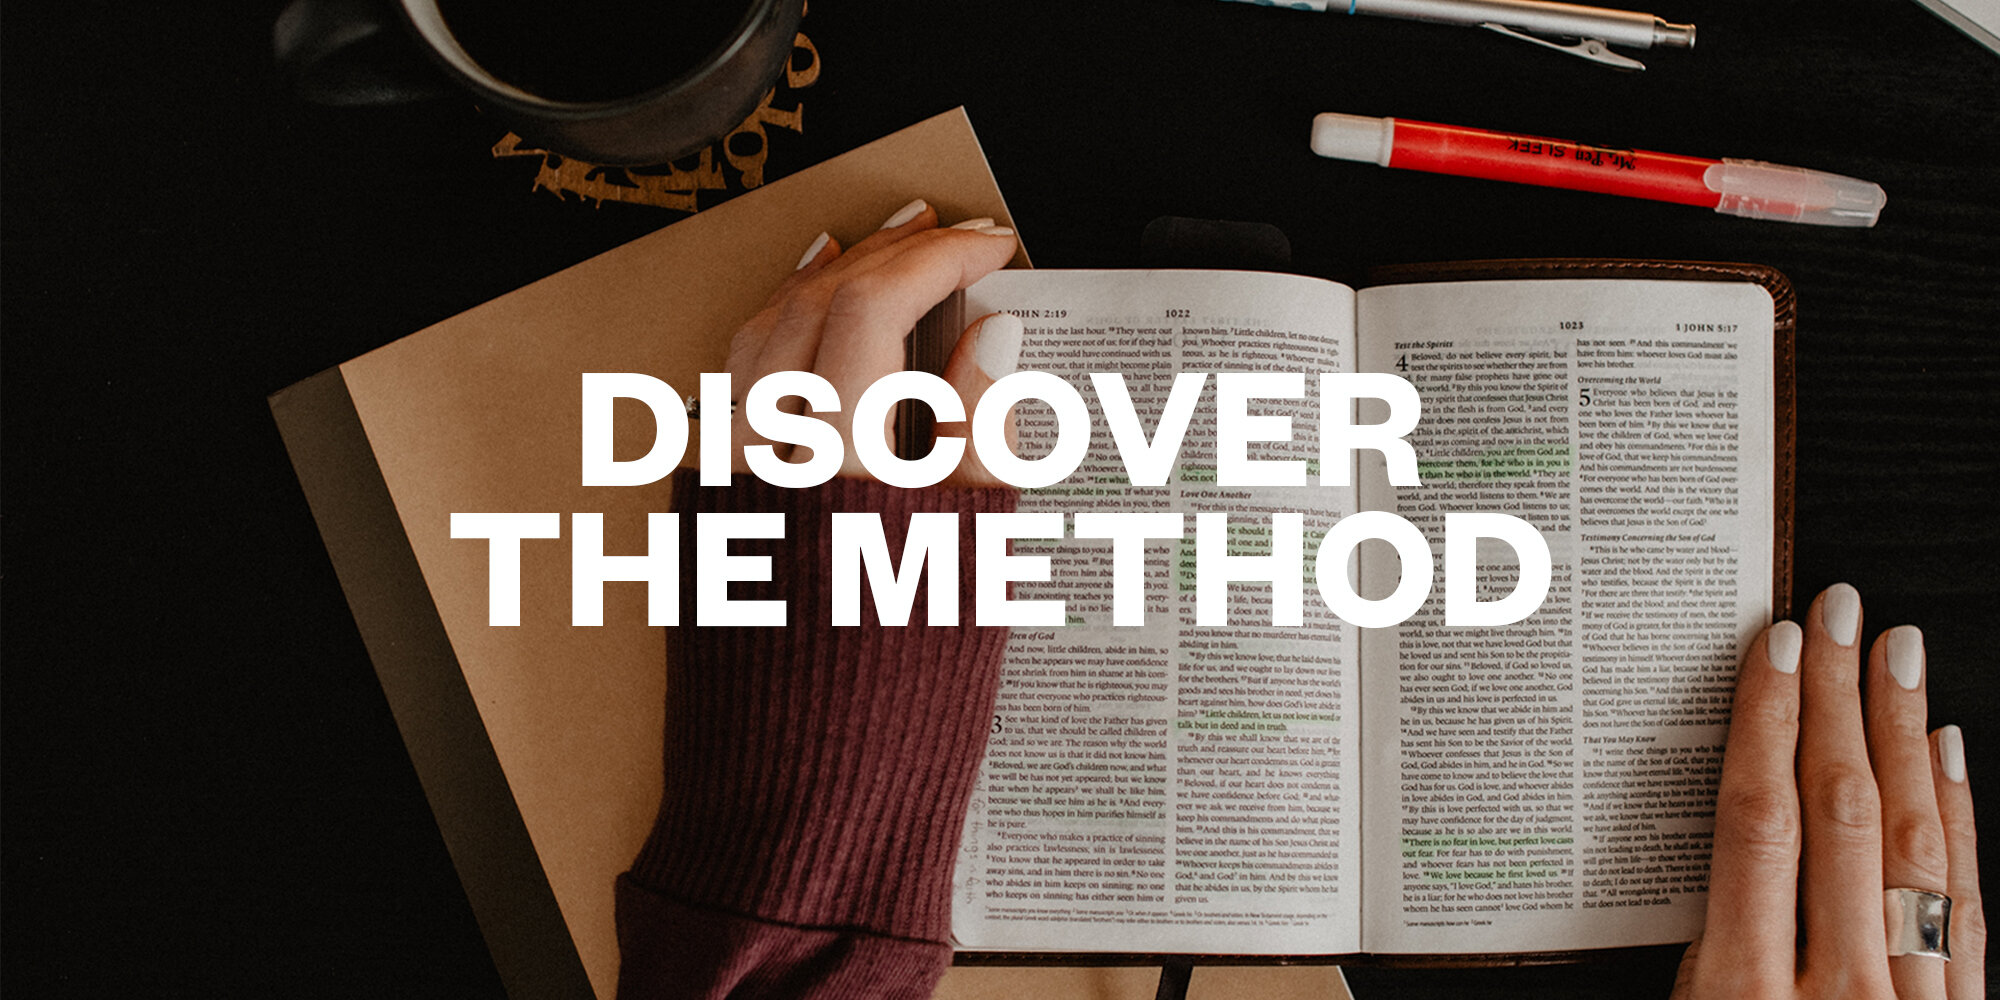 Discover the Method